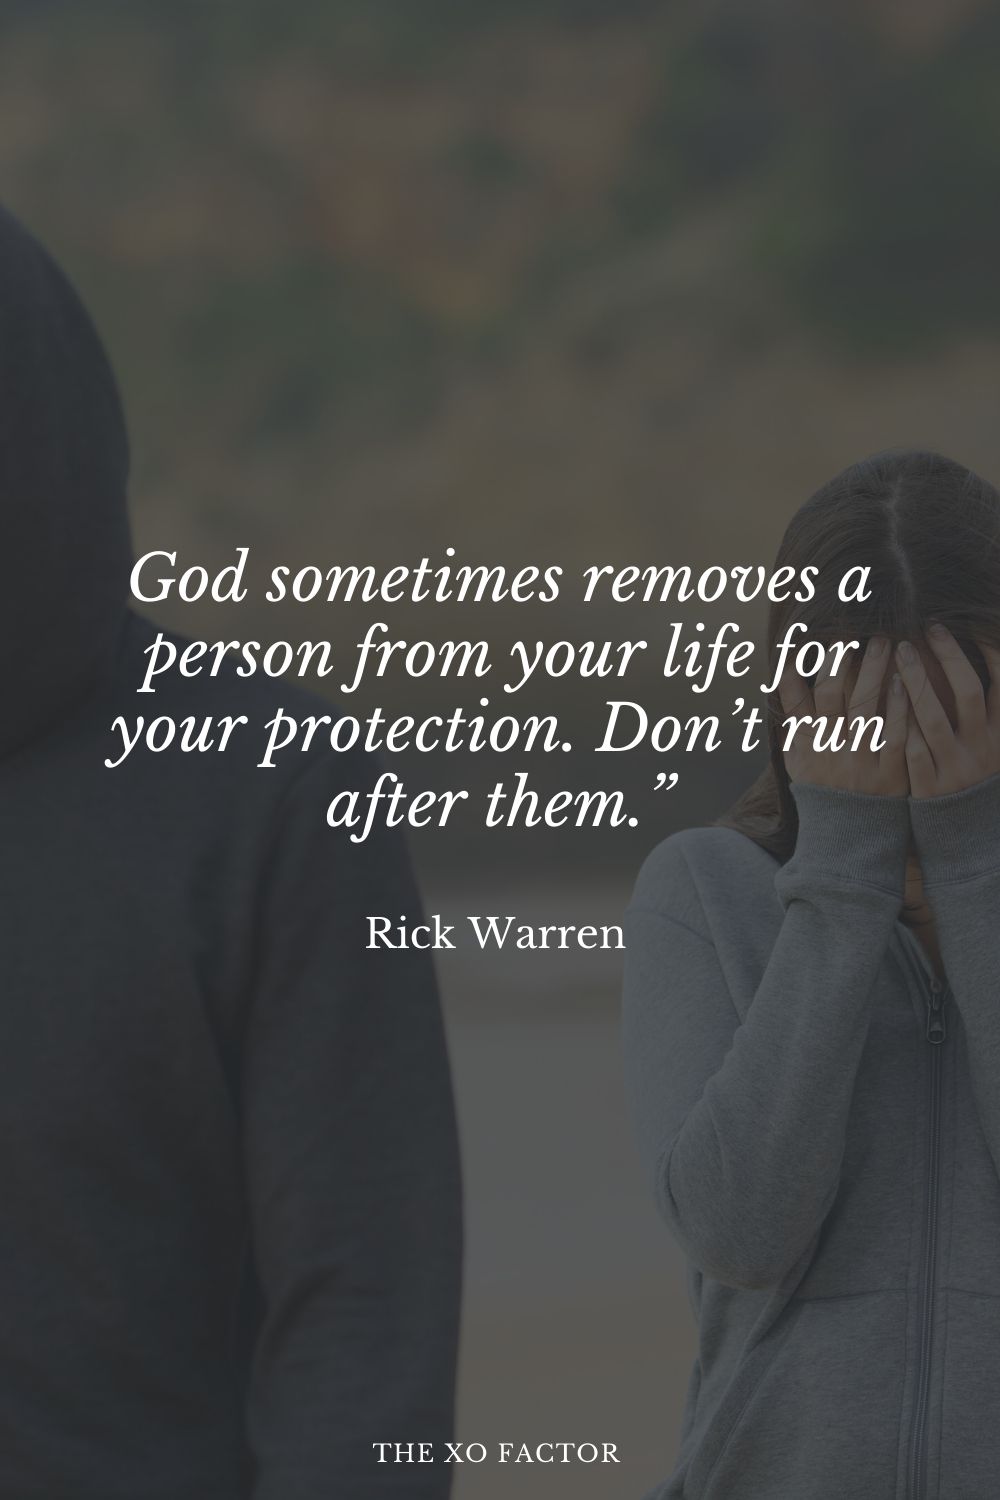 God sometimes removes a person from your life for your protection. Don’t run after them.” Rick Warren